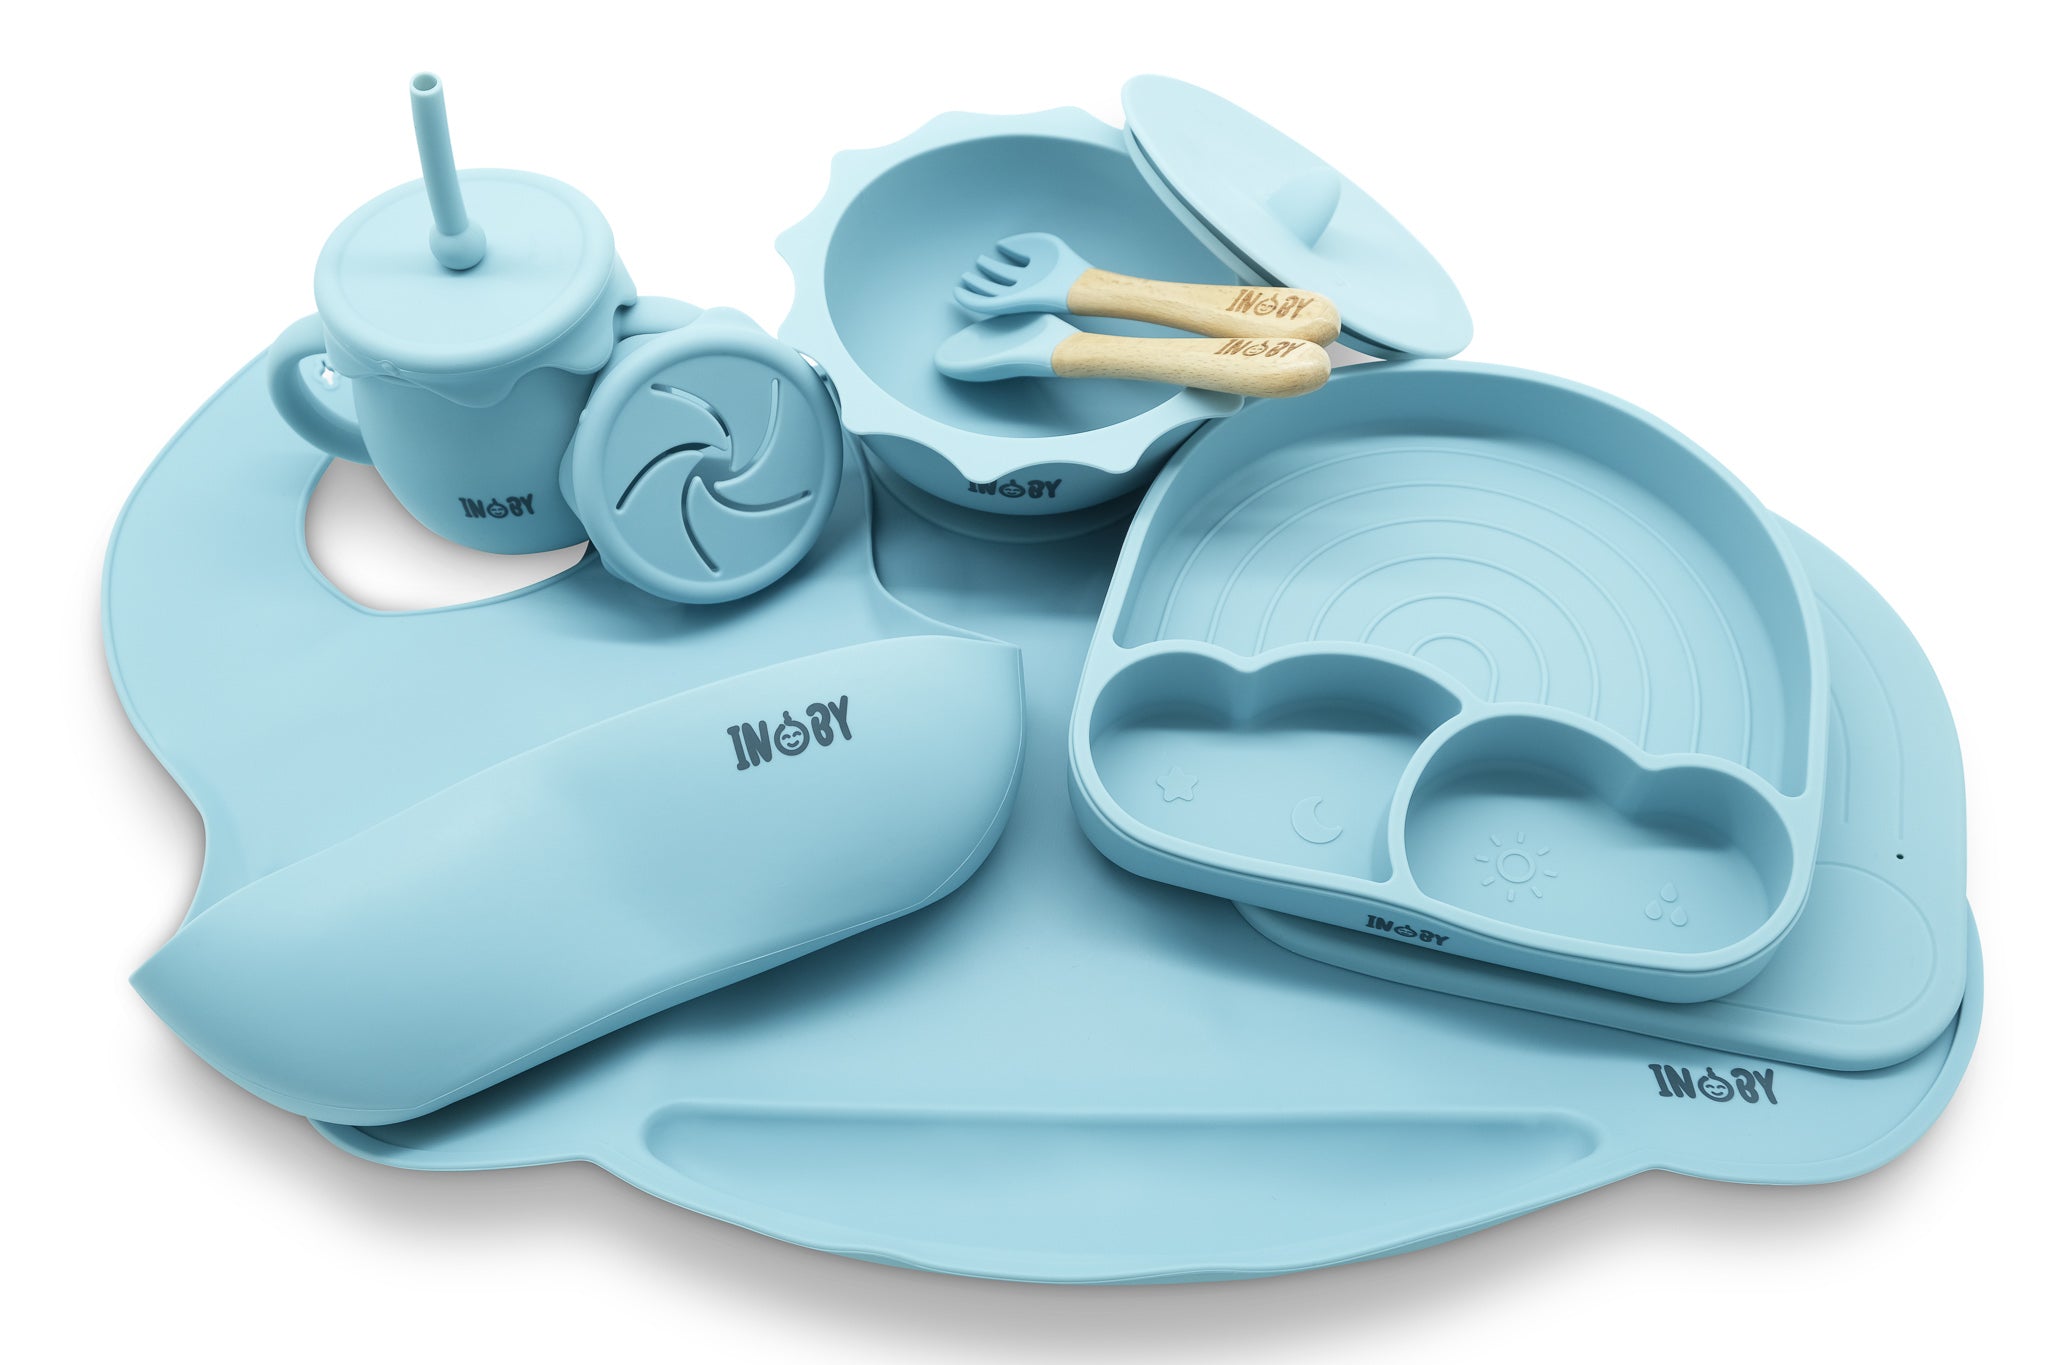 INOBY Silicone Complete Weaning Set INOBY UK